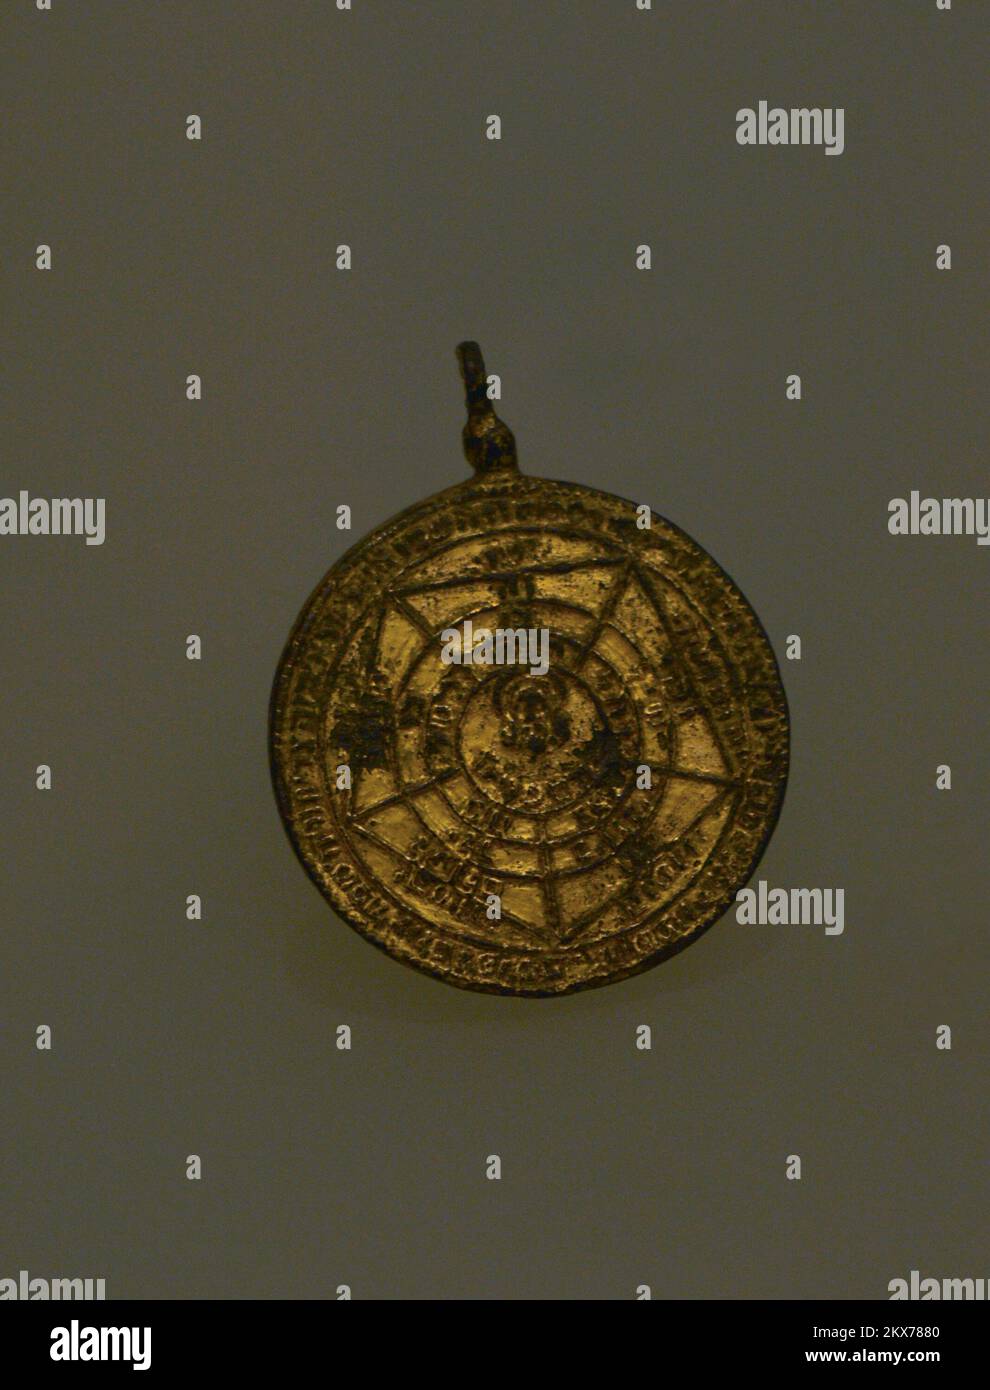 Amulet with Hebrew inscriptions. 15th-16th centuries. Obverse depicting Christ in a pentagon. It was used by Christians who travelled across the Mediterranean on their way to the Holy Land. Bronze with gold plating. Found in the Church of San Pedro (Cuenca, Spain). Sephardic Museum. Toledo. Castile-La Mancha. Spain. Stock Photo